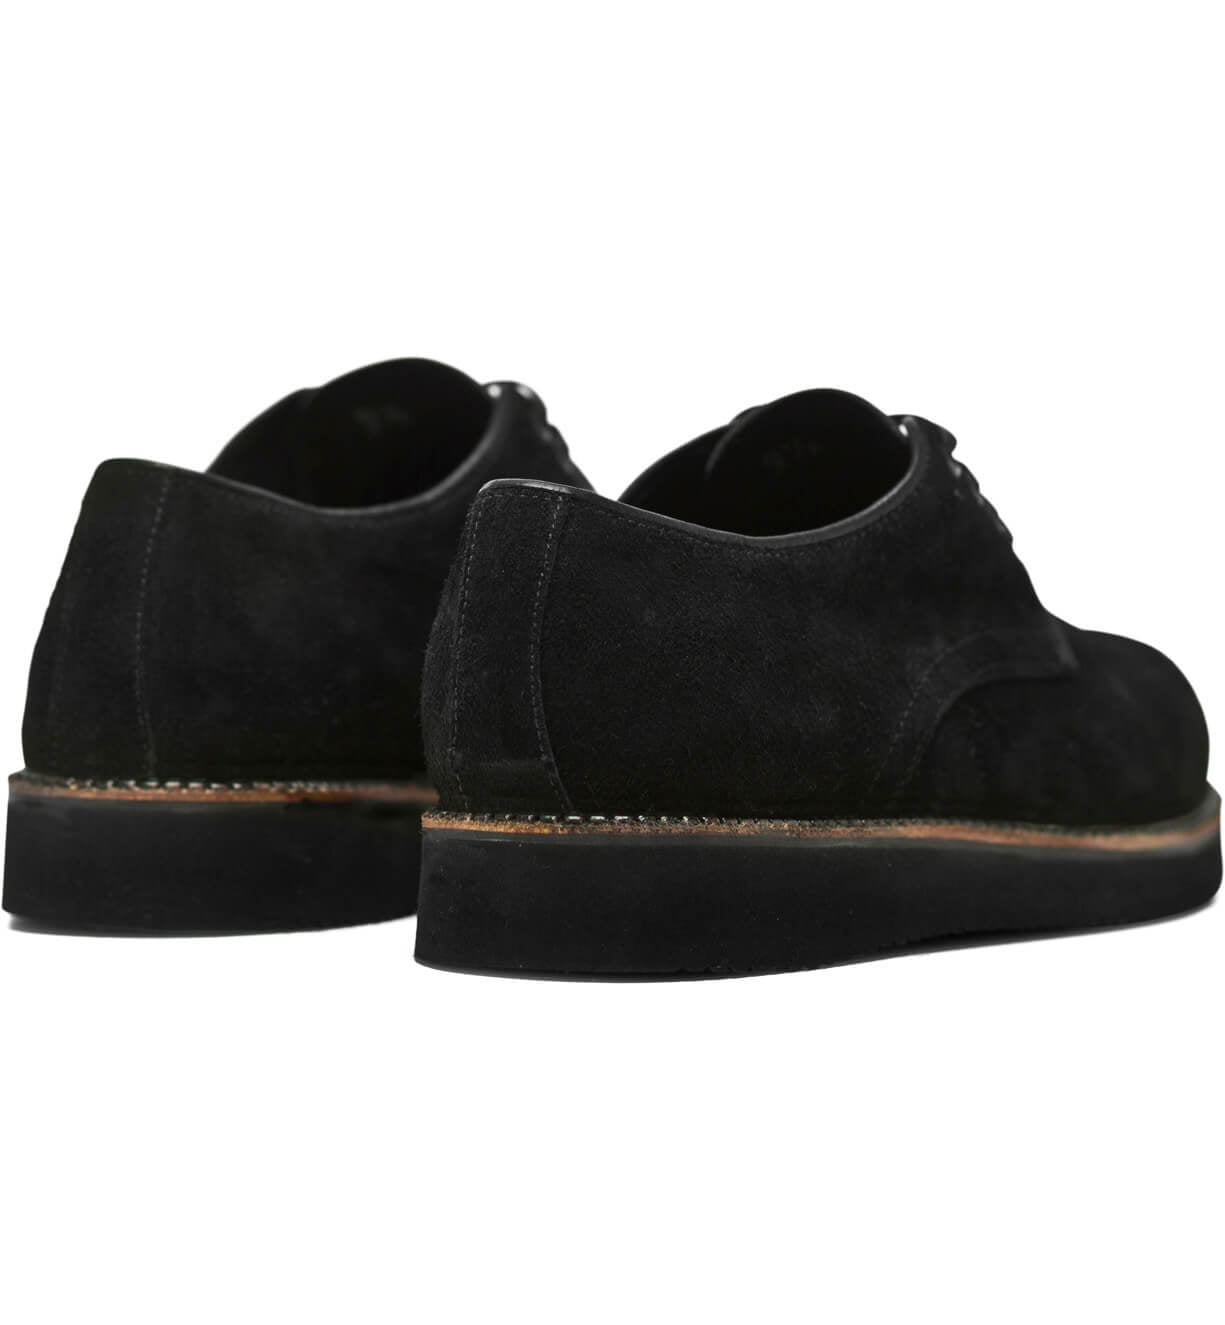 A pair of Michael II black suede shoes with pinpoint construction details on a white background, made by Broken Homme.